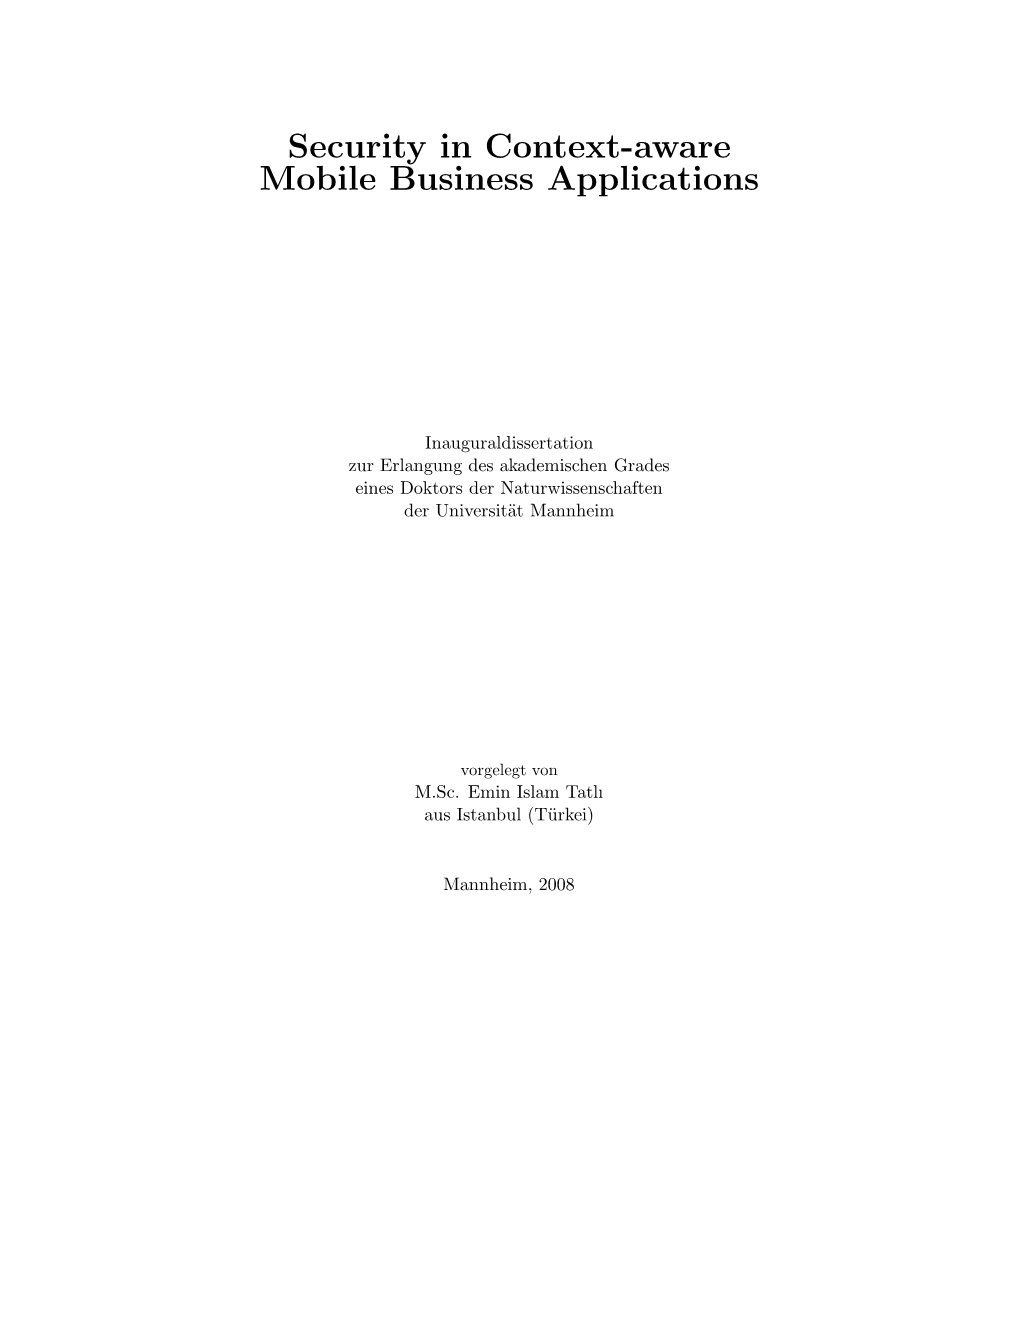 Security in Context-Aware Mobile Business Applications